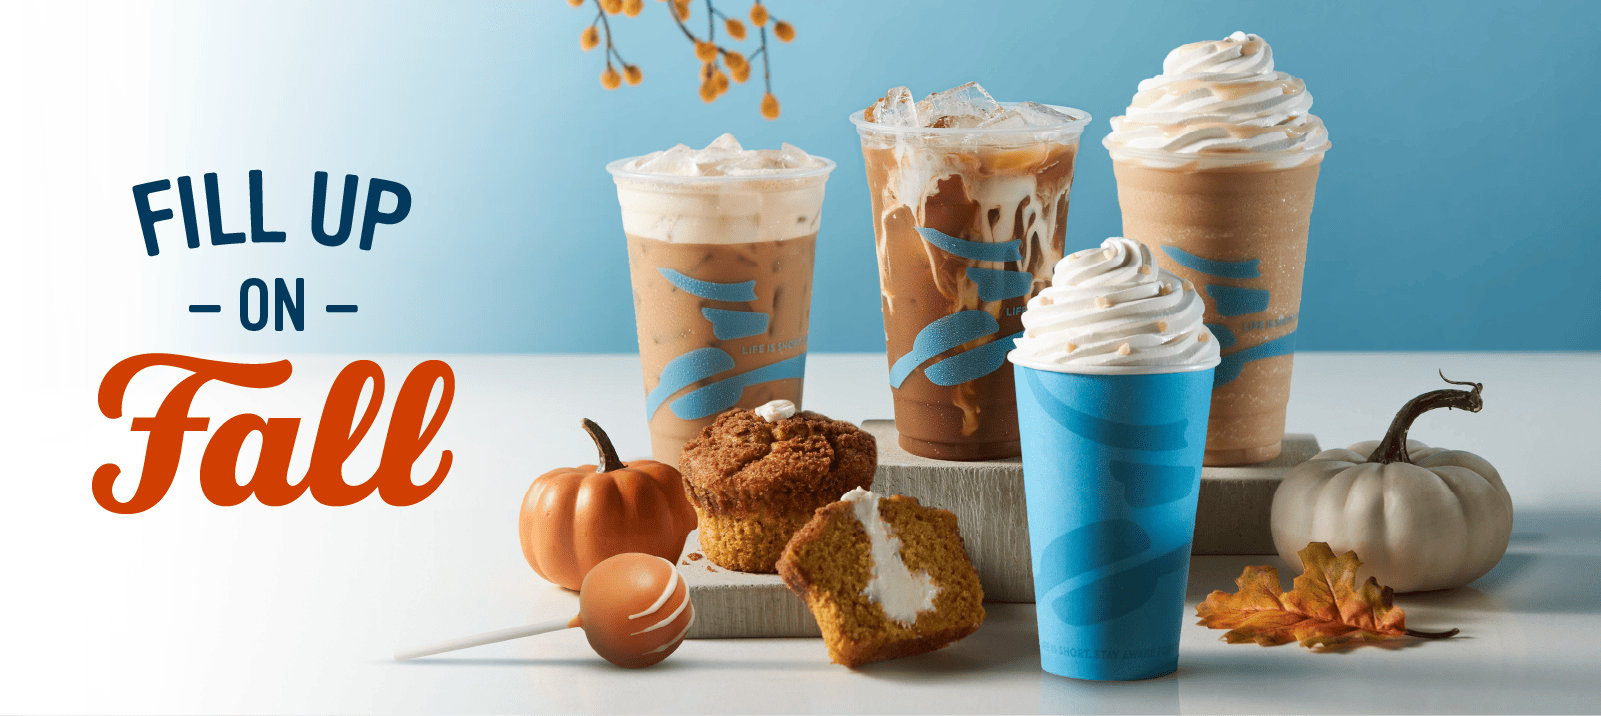 Fill up on Fall. Fall menu at Caribou Coffee features the Pumpkin Espresso Shaker, Pumpkin White Mocha, Pumpkin Cream Cheese Muffin and 15 different beverage options to try.